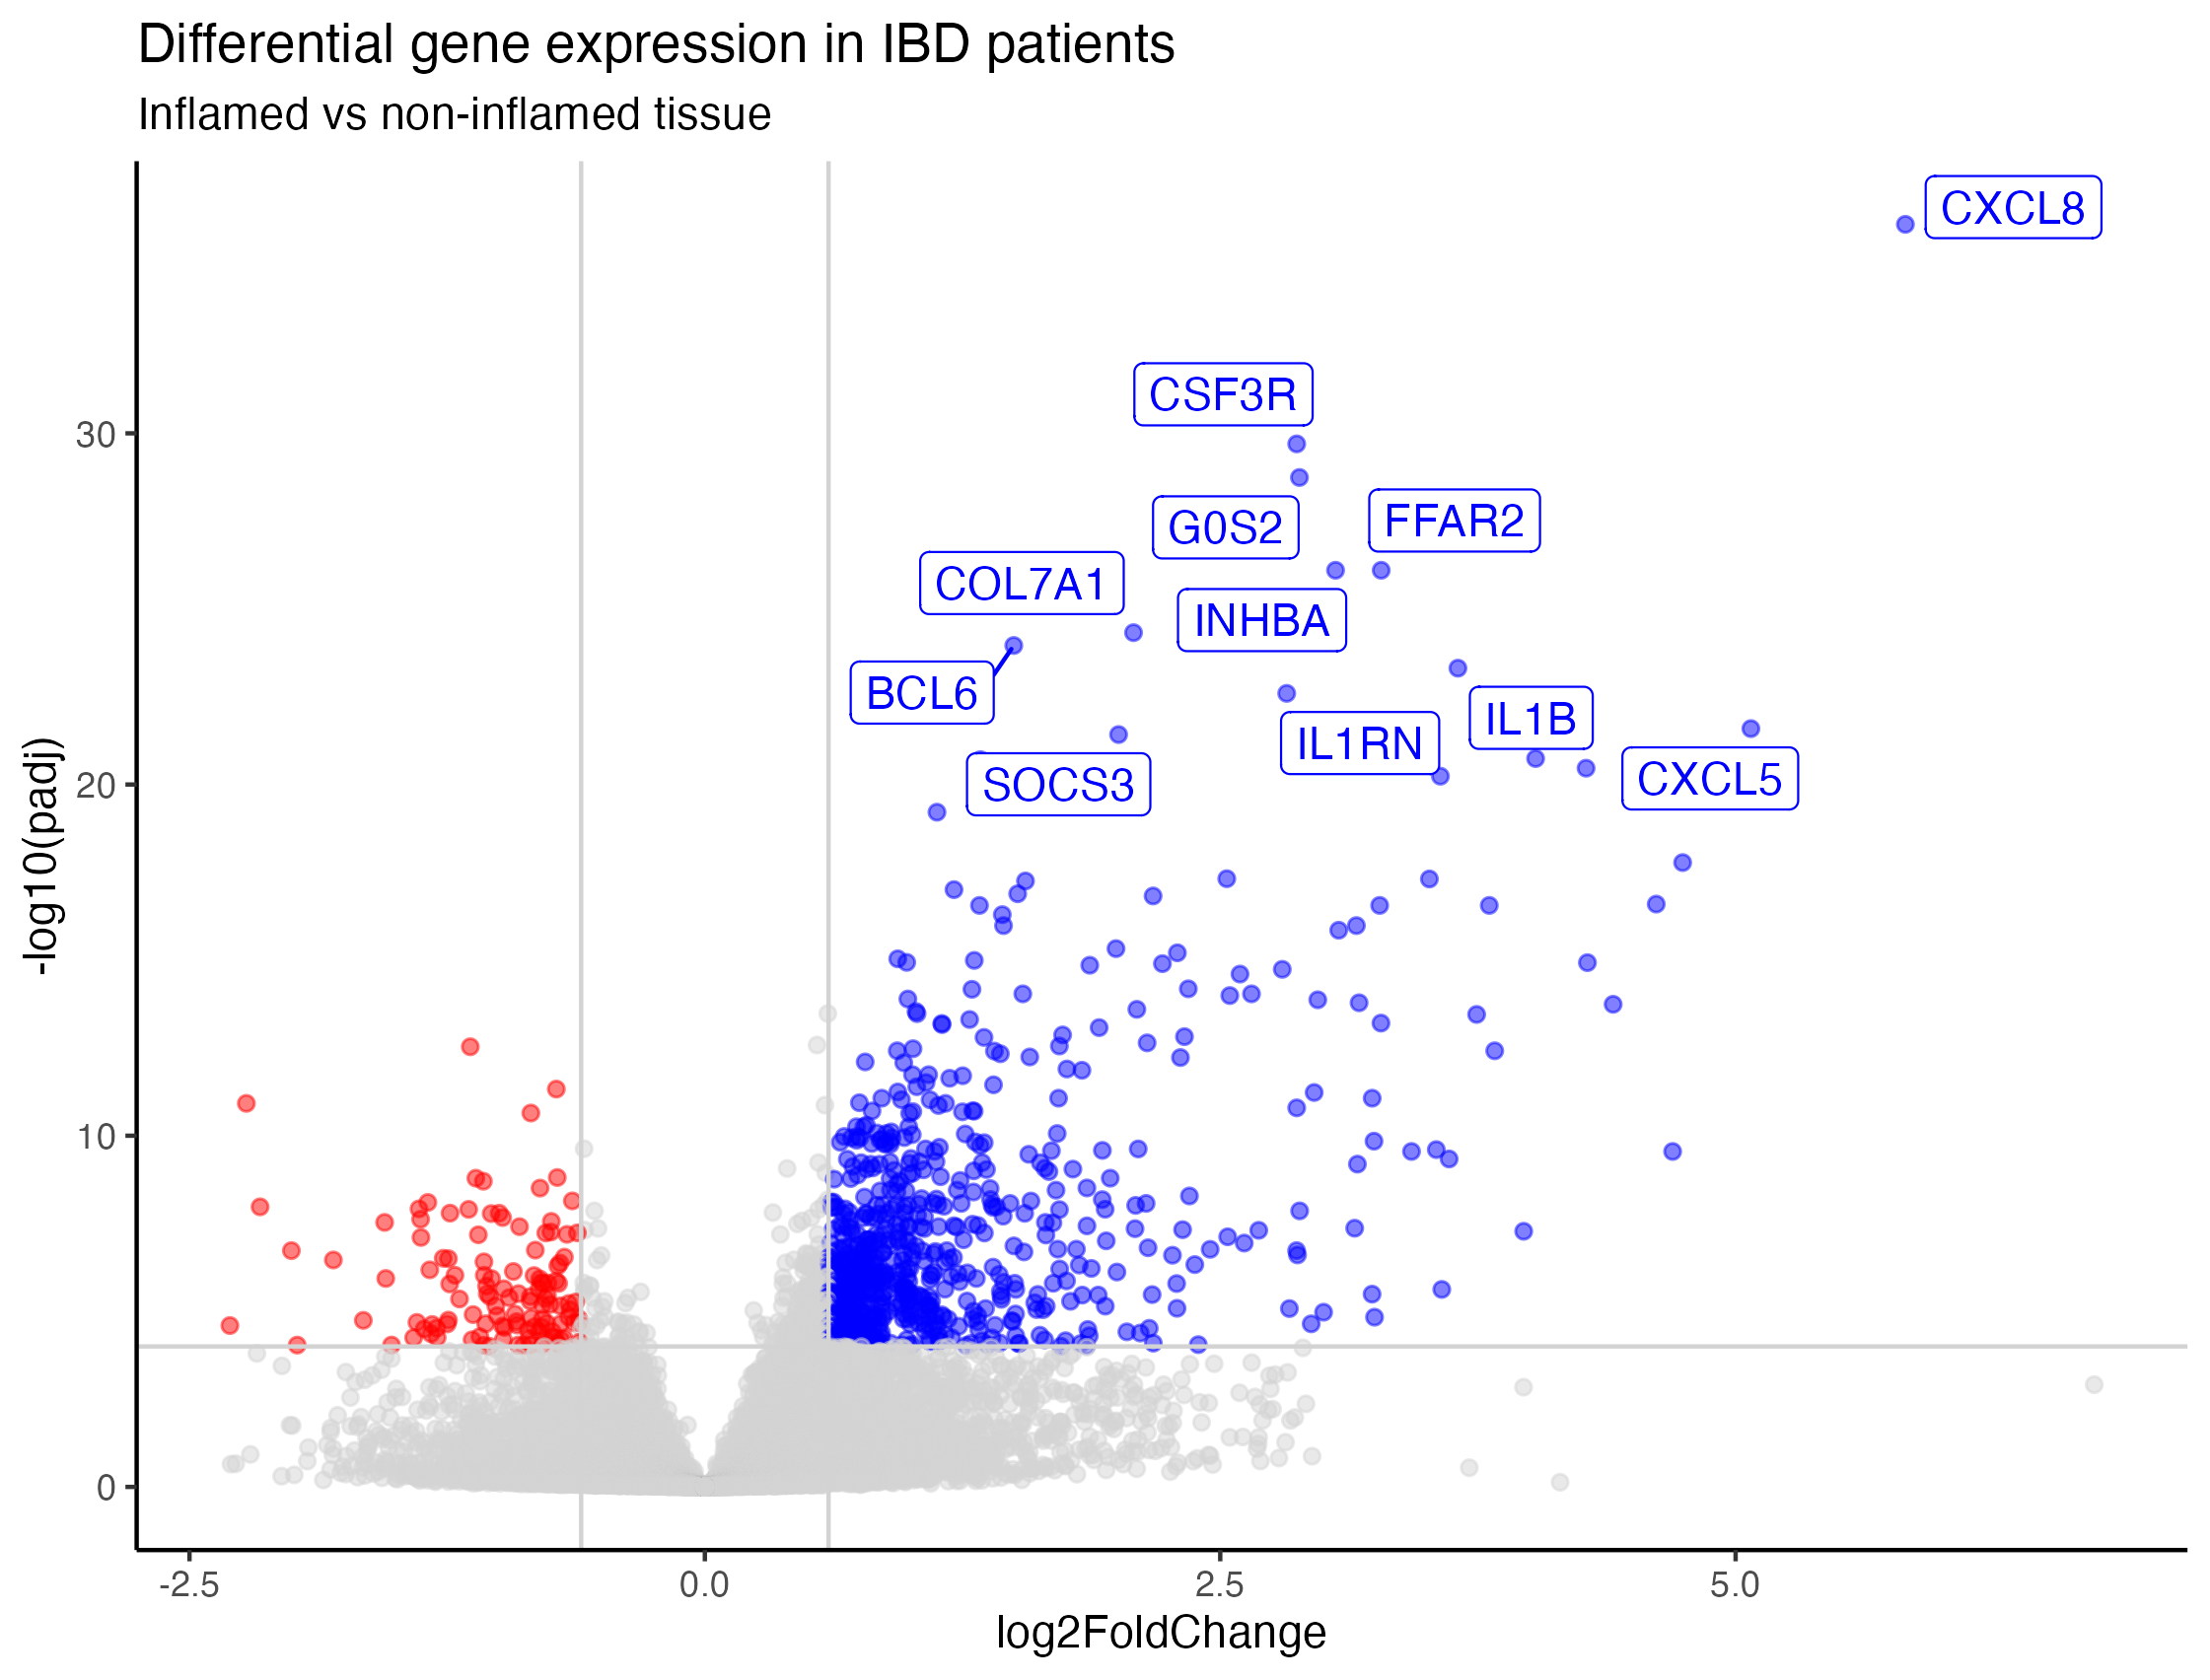 Volcano plot showing differential gene expression in Ovation IBD Omics Data